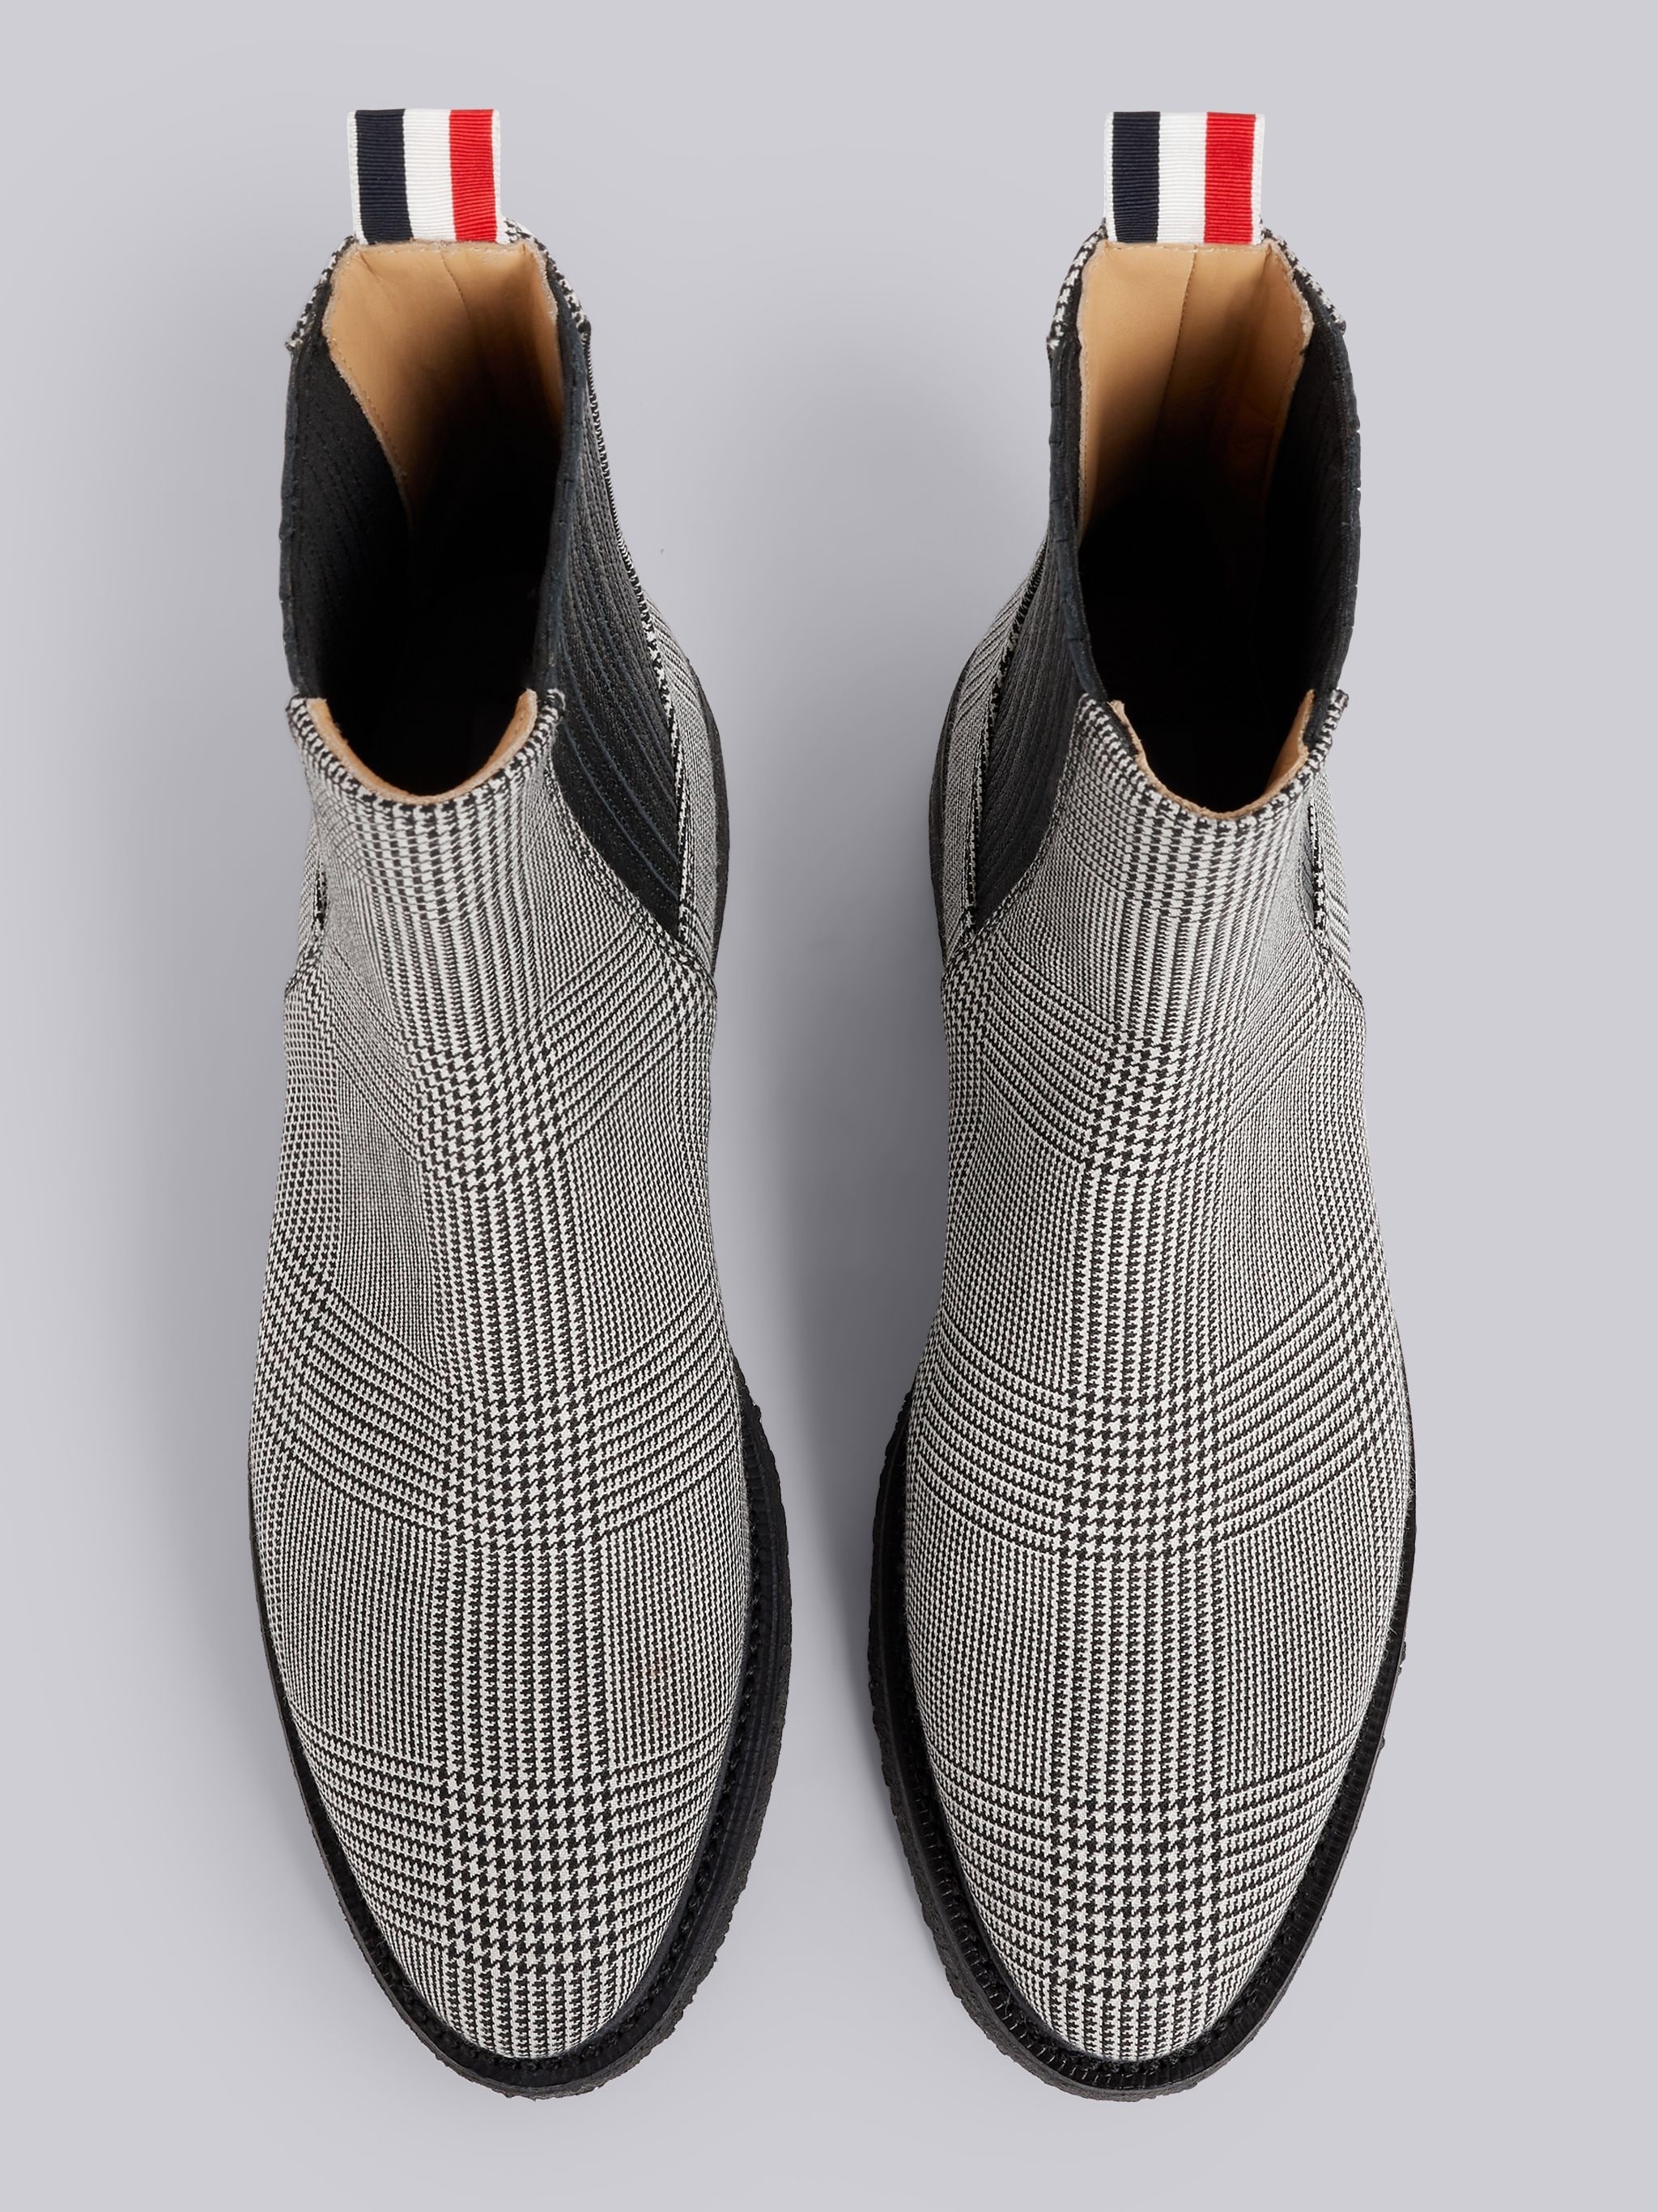 Black and White Prince of Wales Crepe Sole Chelsea Boot - 4